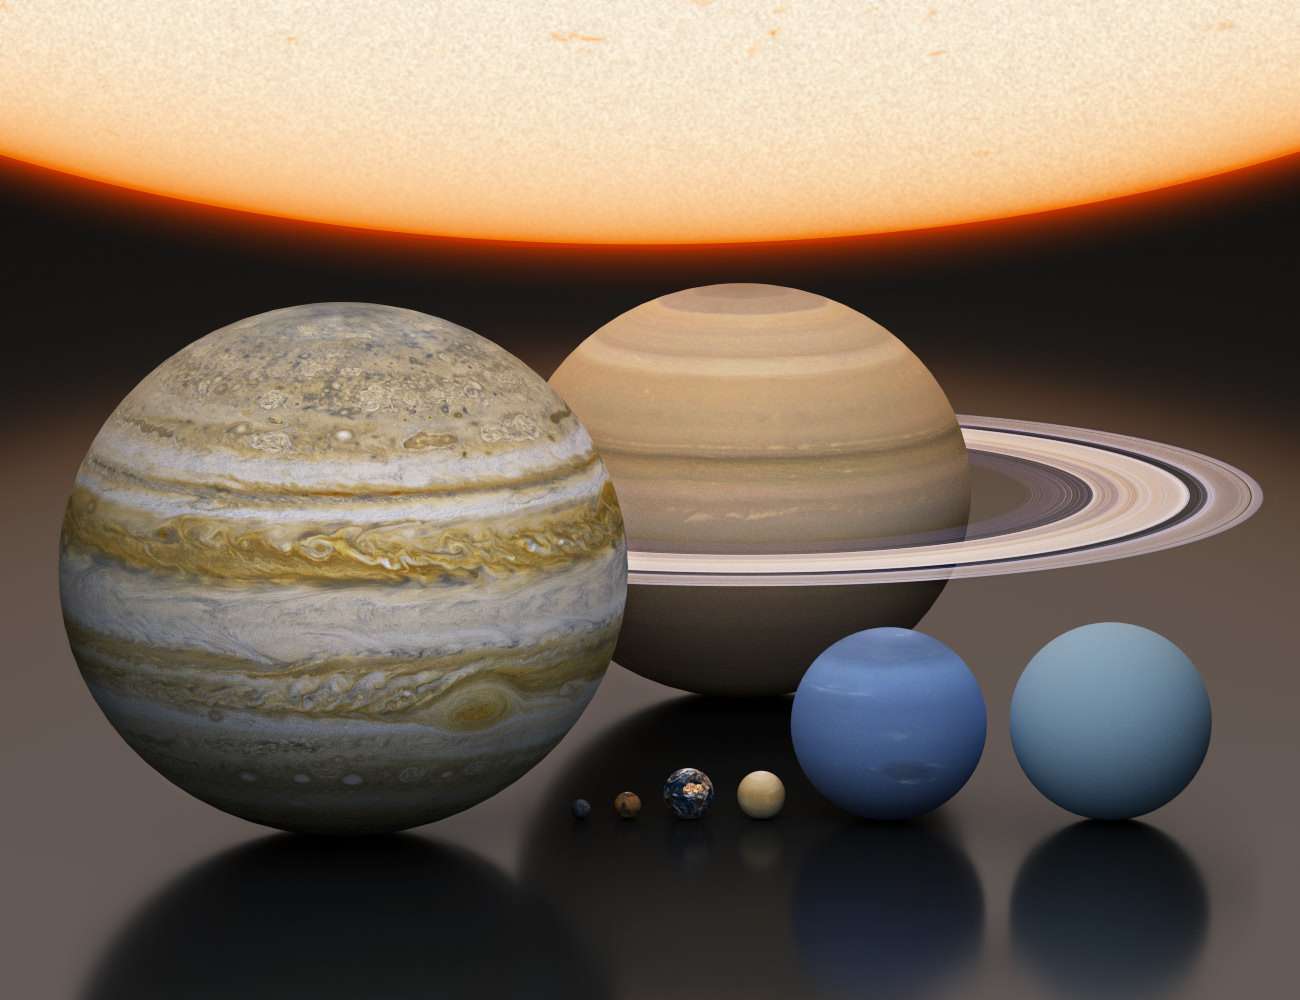 planets in order of size for kids